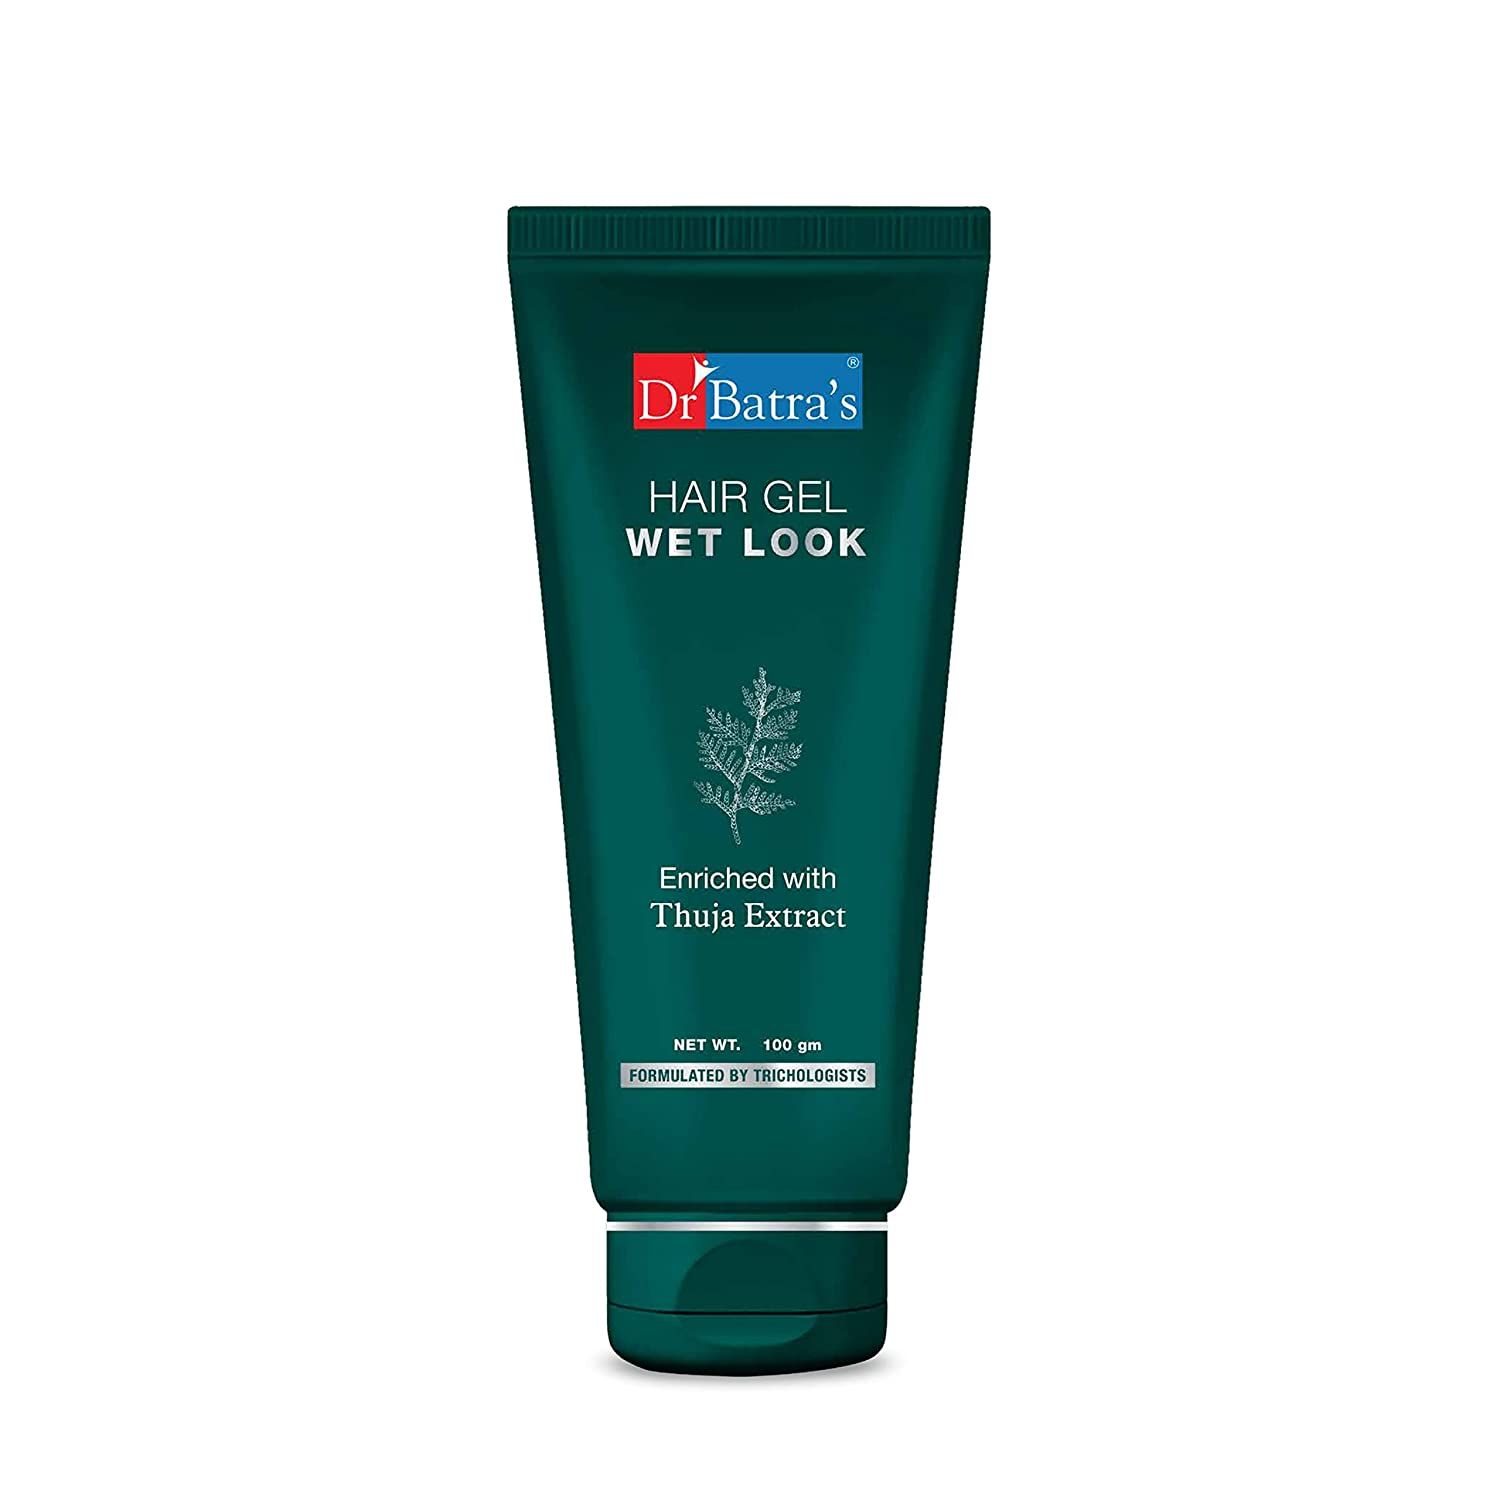 Dr Batras Hair Gel Wet Look Enriched With Thuja,Helps to inhibit DHT and reduces risk of hair loss